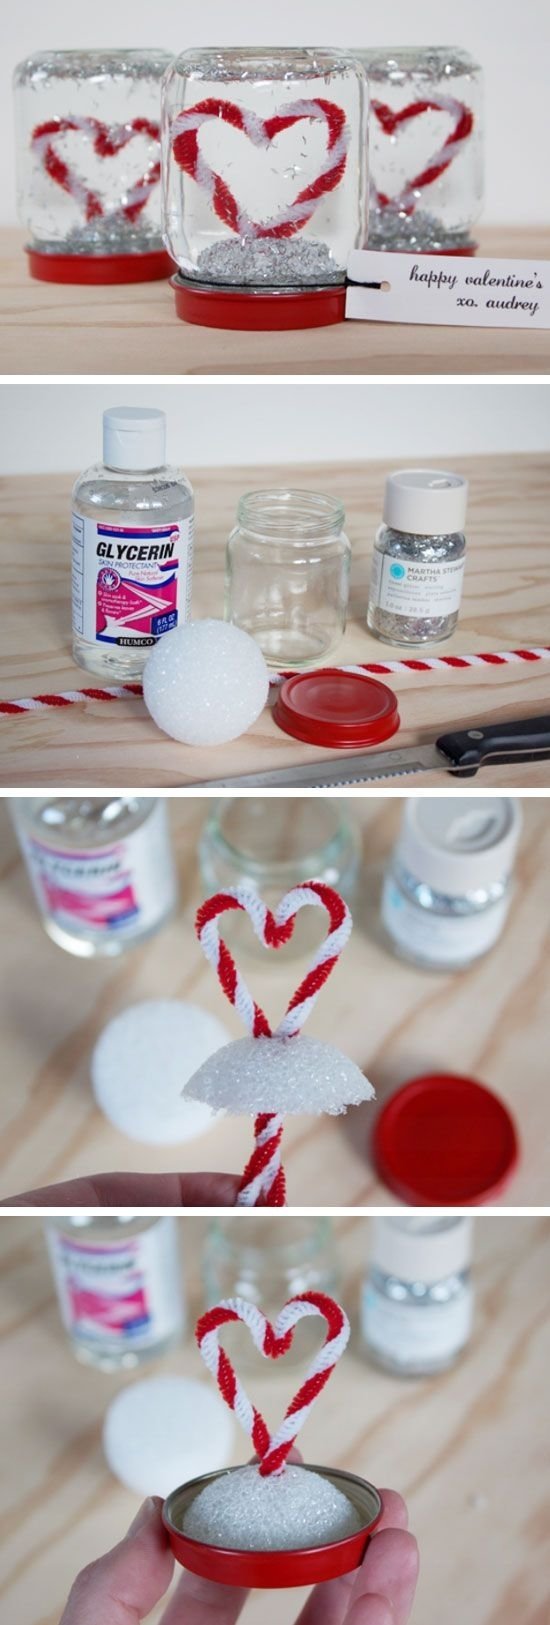 10 Wonderful Valentines Day Ideas For Teenage Couples 246 best valentines images on pinterest glass jars jars and mason 2022